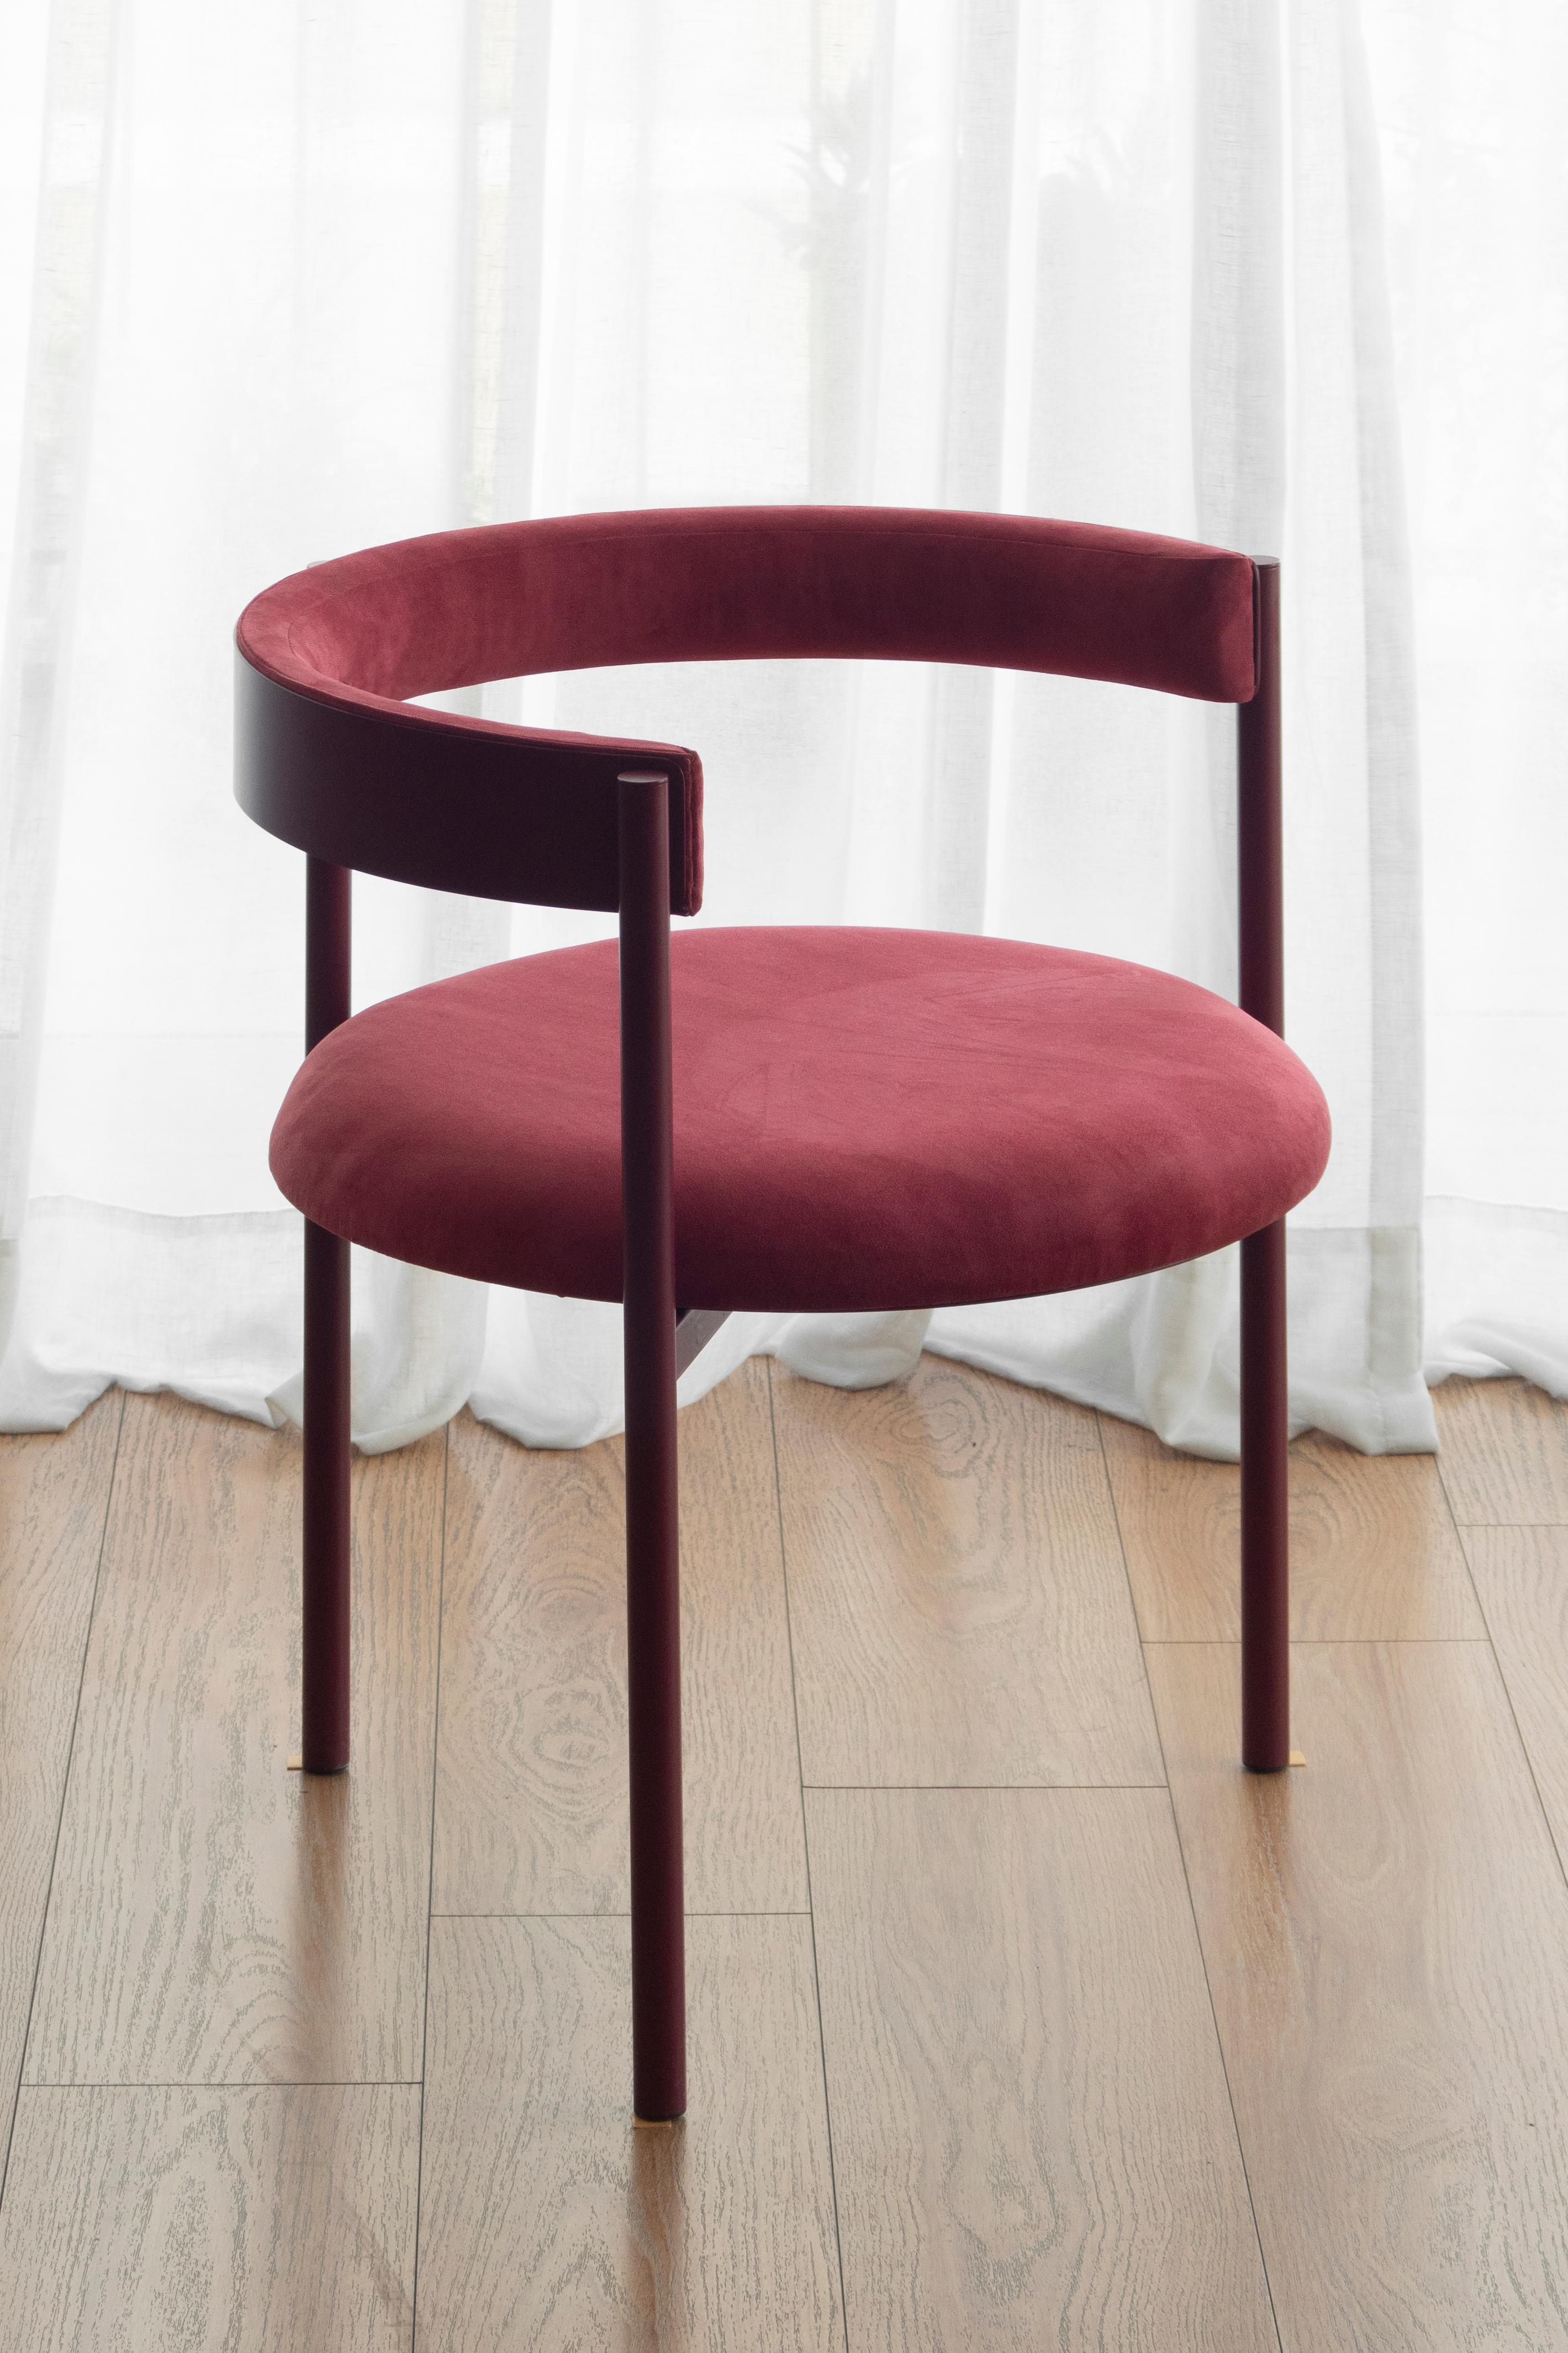 Aro Chair, Merlot by Ries
Dimensions: W60 x D60 x H67,5 cm 
Materials: round steel tube, high-density foam, and velvet upholstery

Also available: black, dark blue, mika, oceano, pink and yellow,

Ries is a design studio based in Buenos Aires,